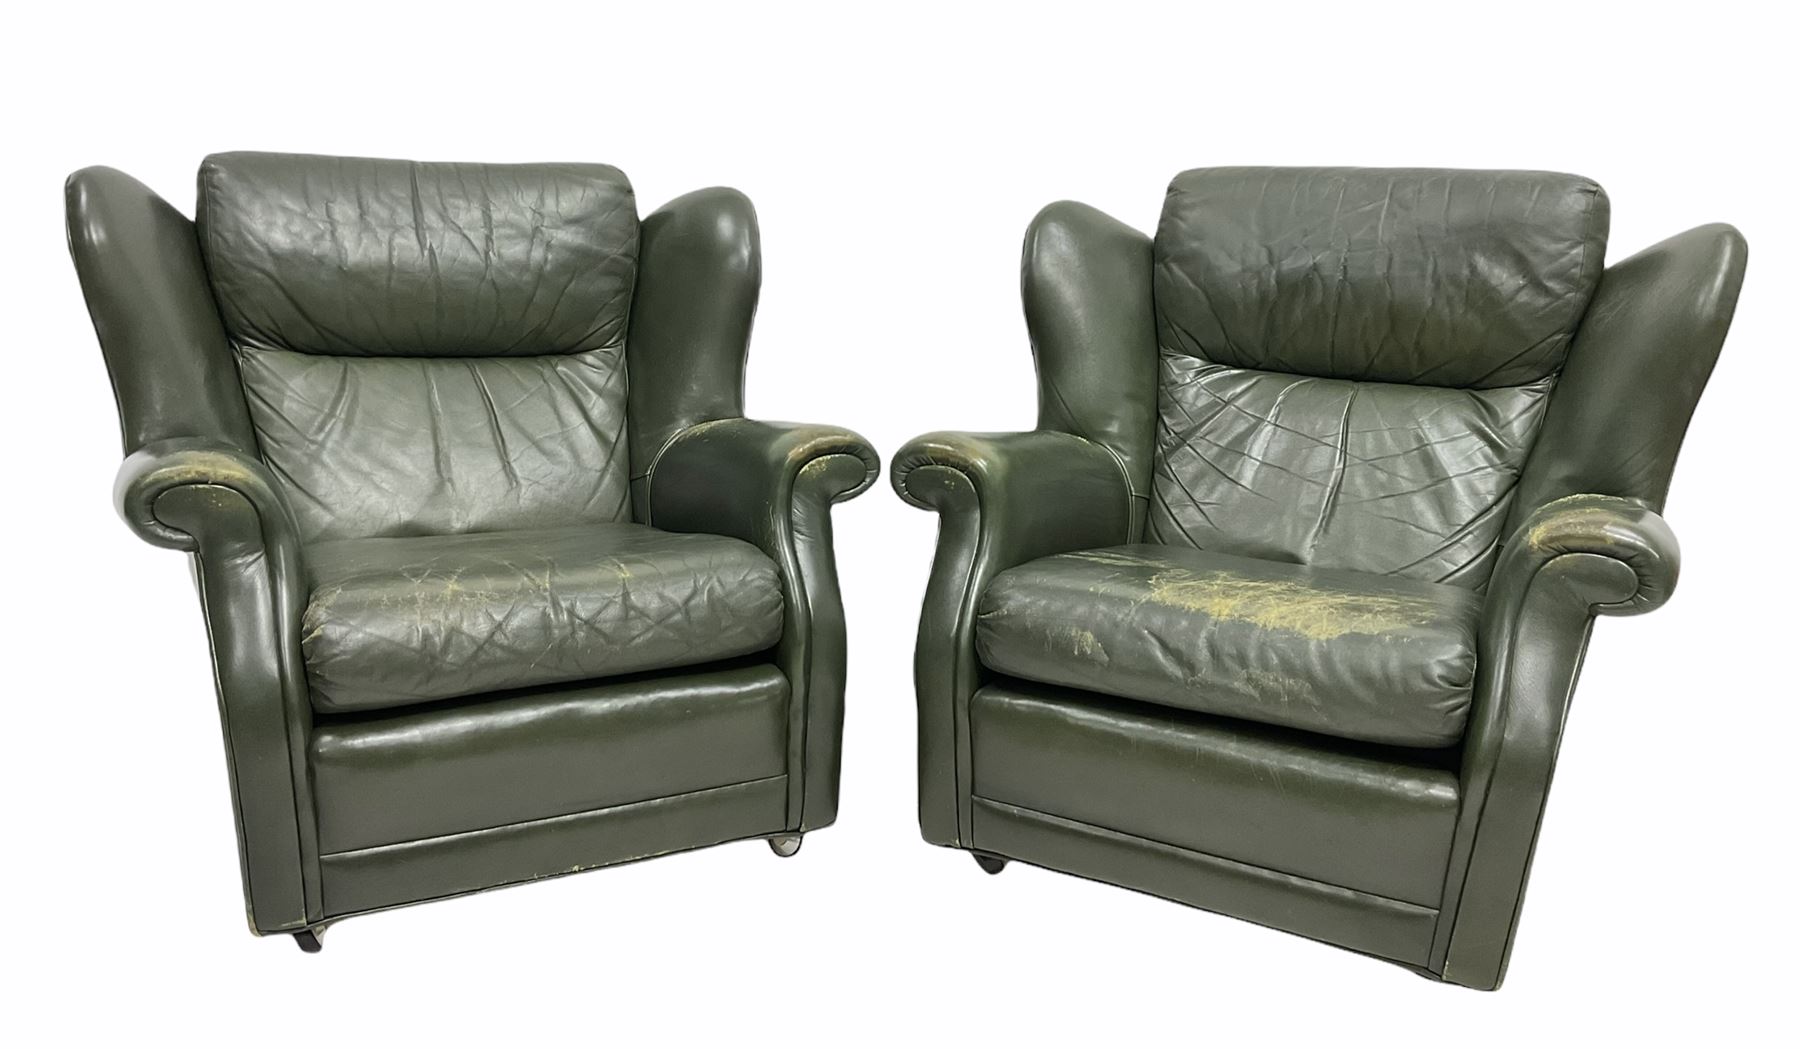 Pair of vintage green leather wing back armchairs